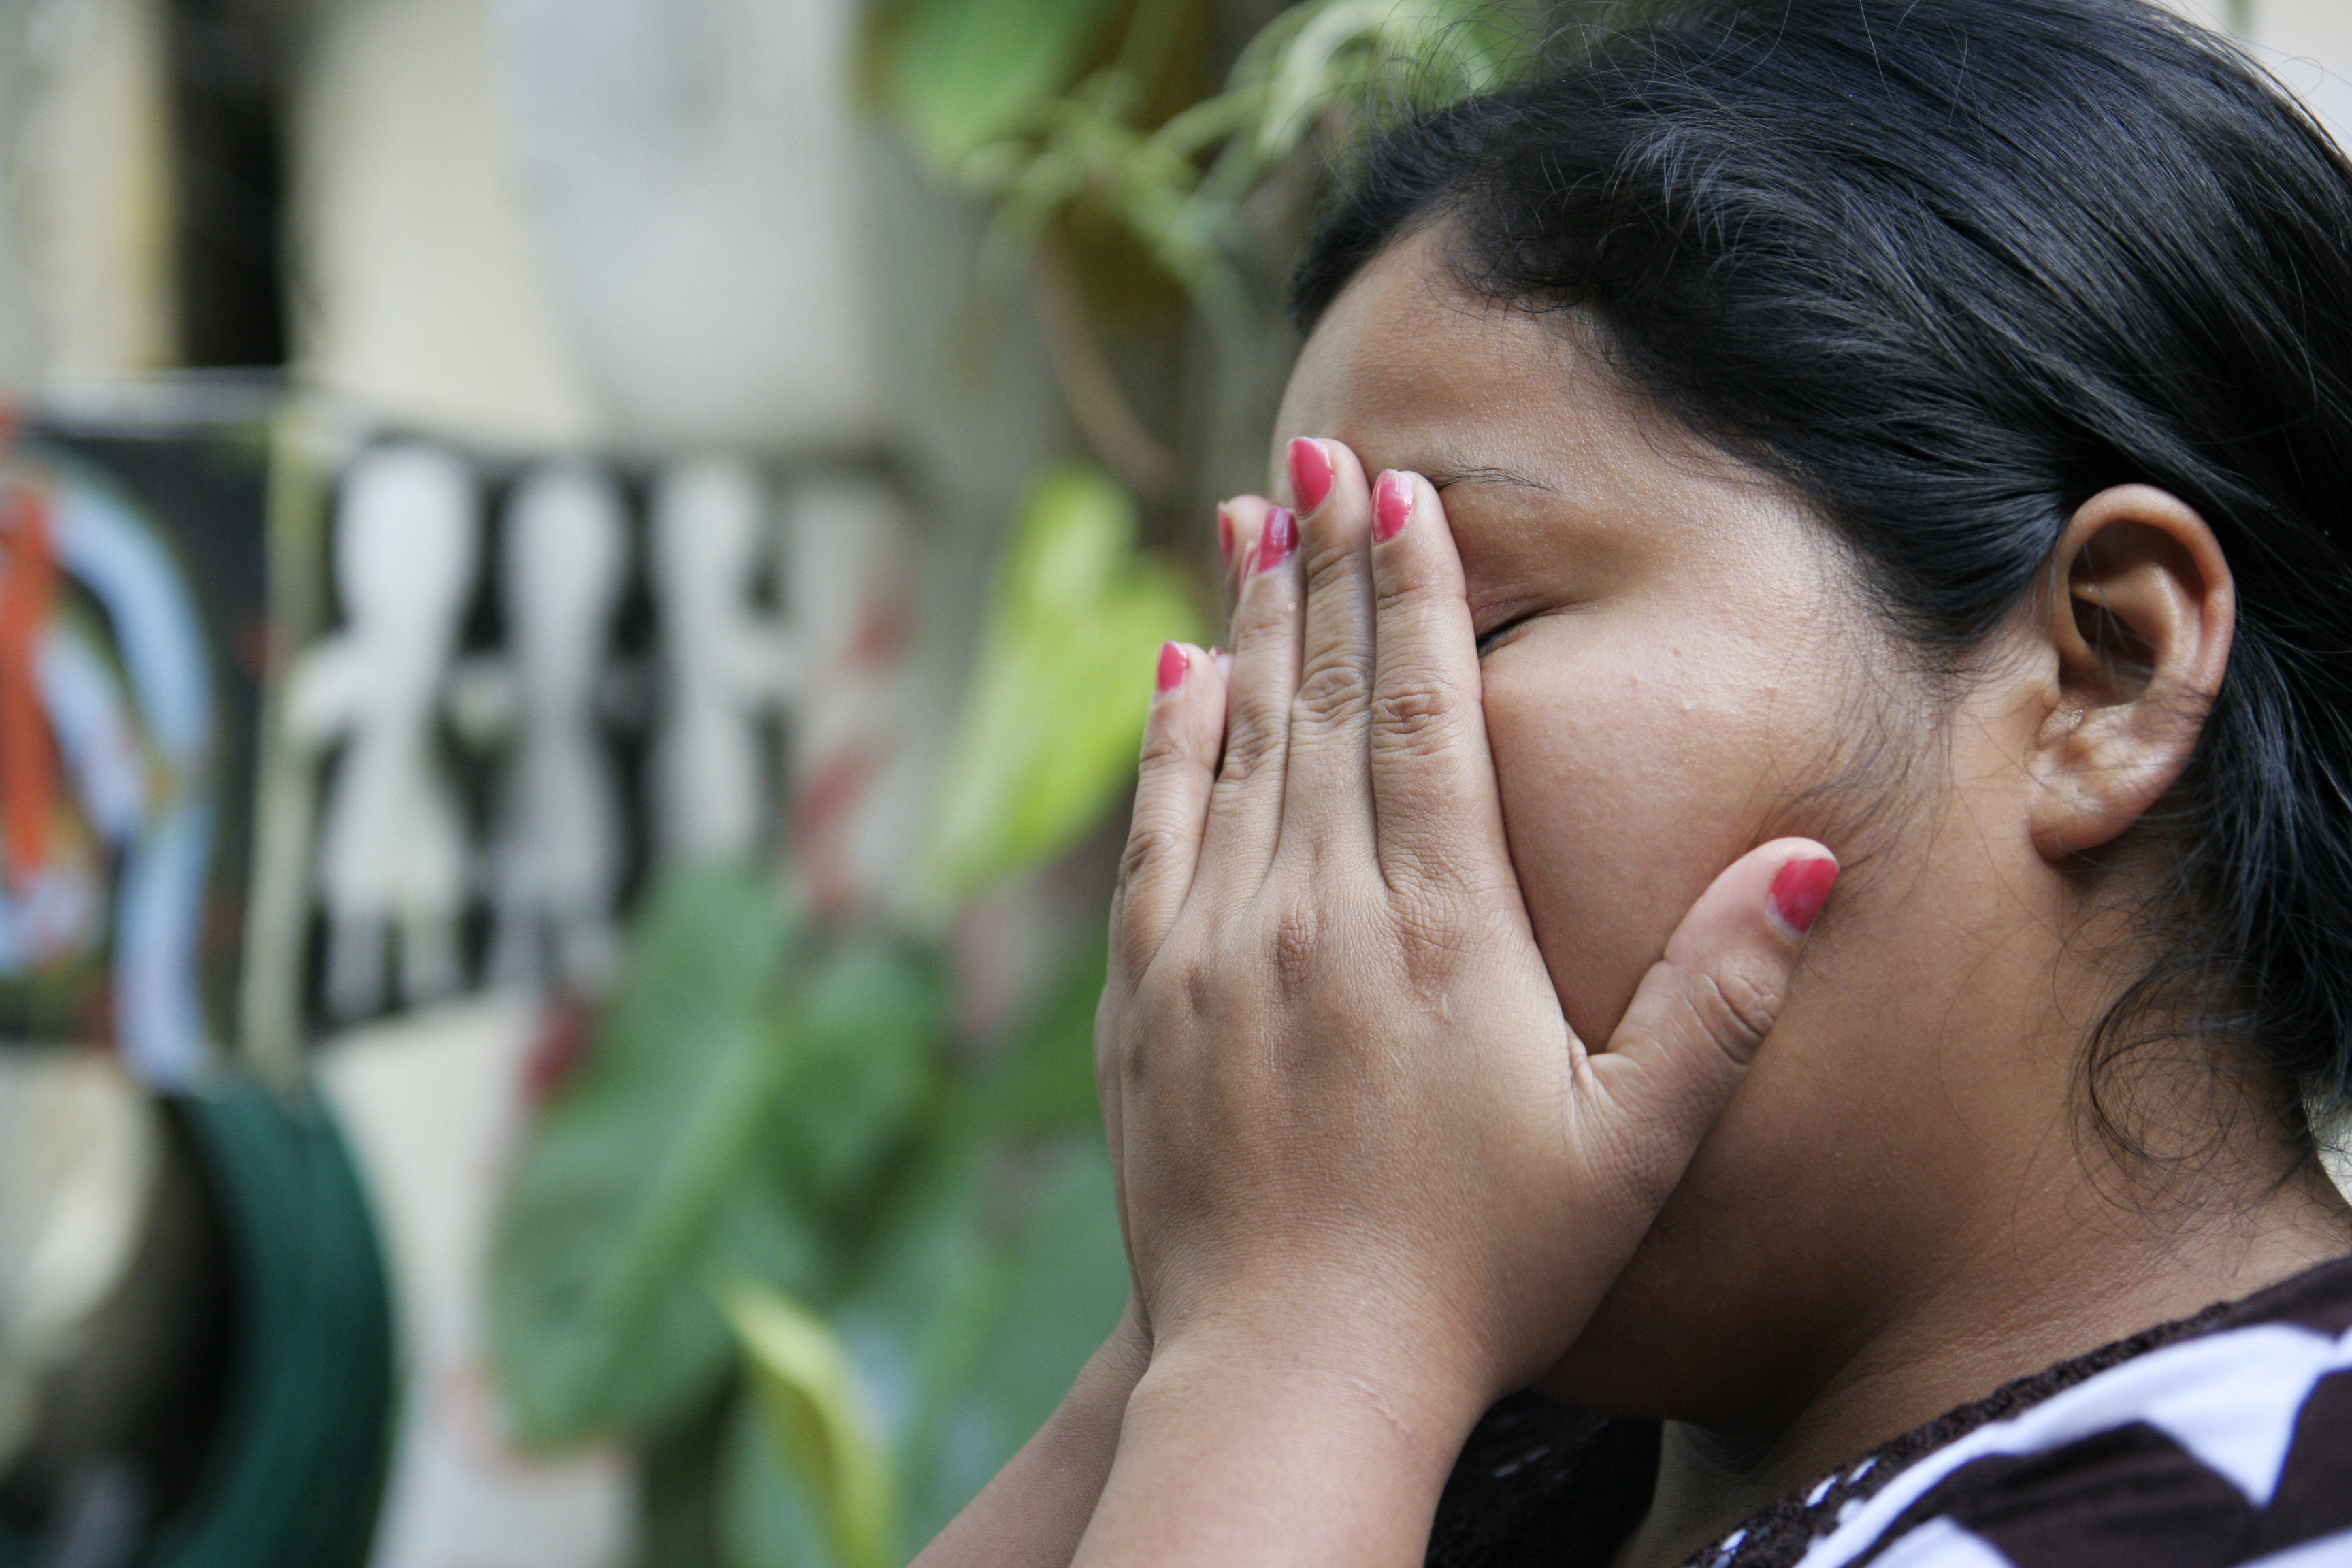 El Salvador: Marlene was accused and charged with having an abortion after she had a miscarriage when she was 18 years old.